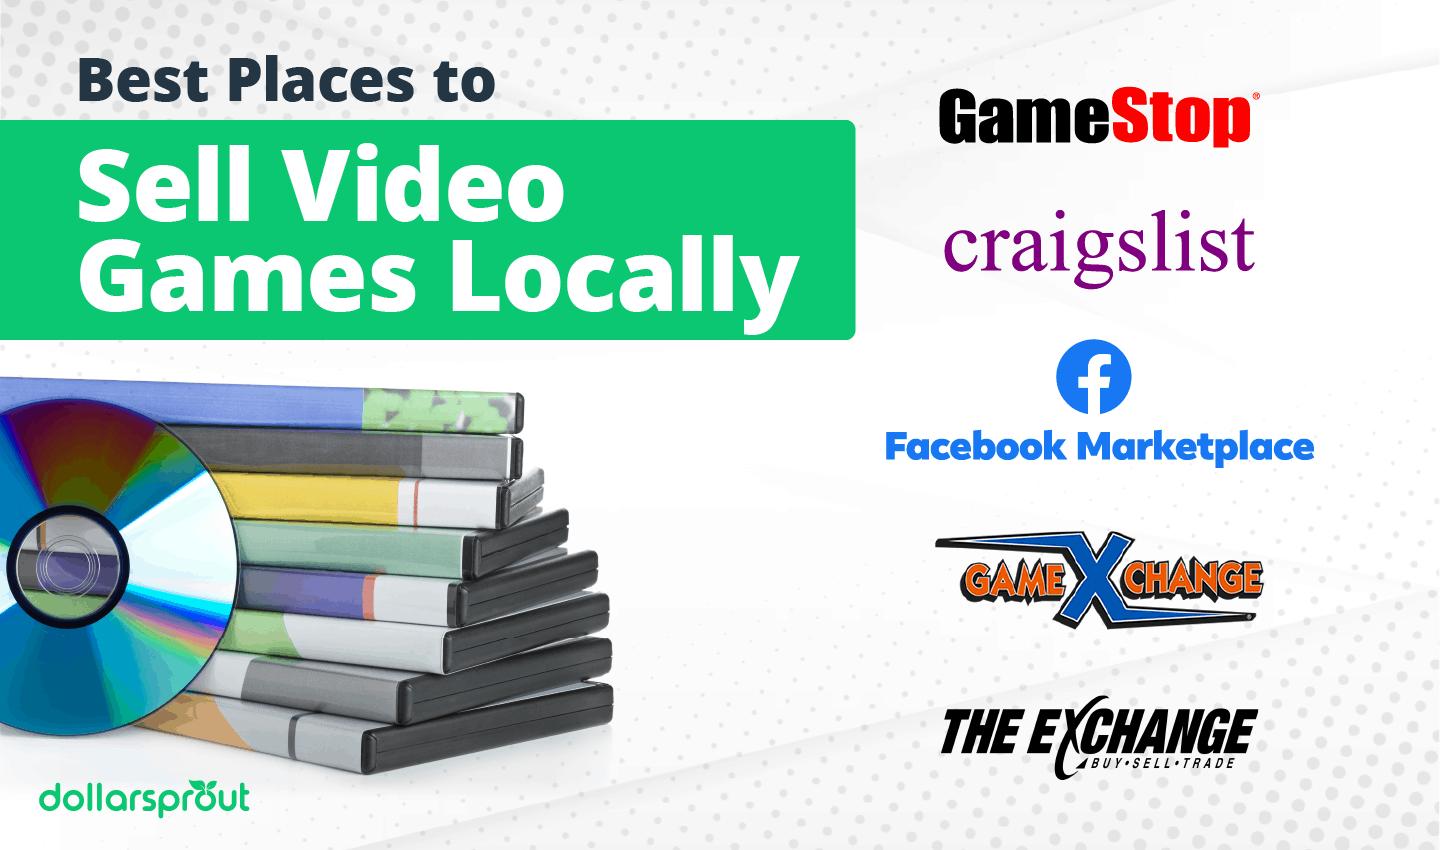 Best Places to Sell Video Games Locally